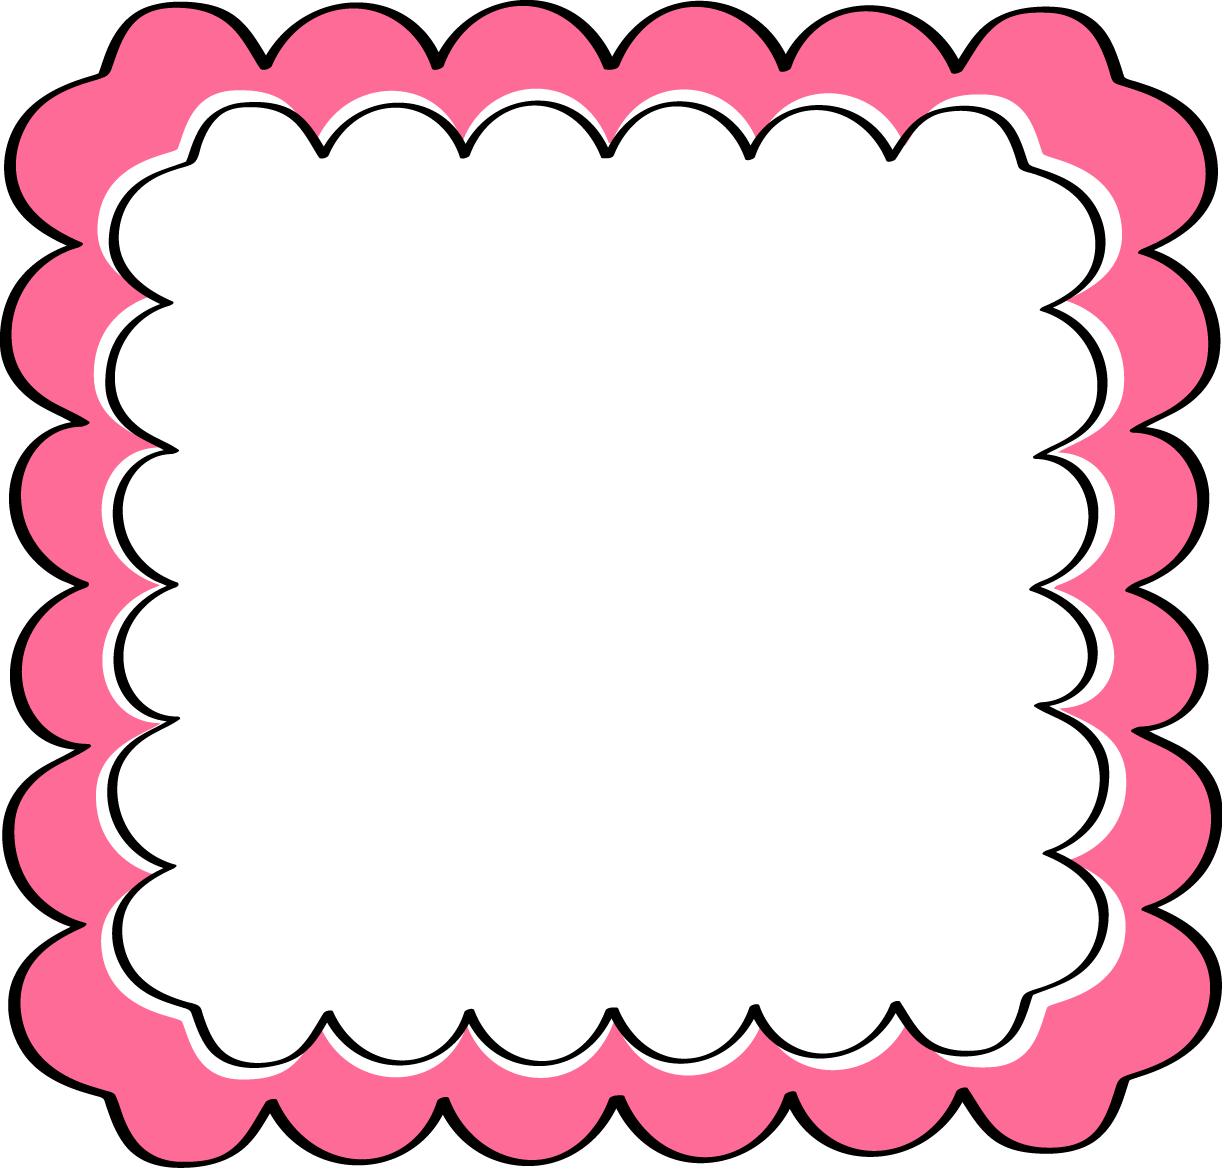 clipart frames and borders - photo #4